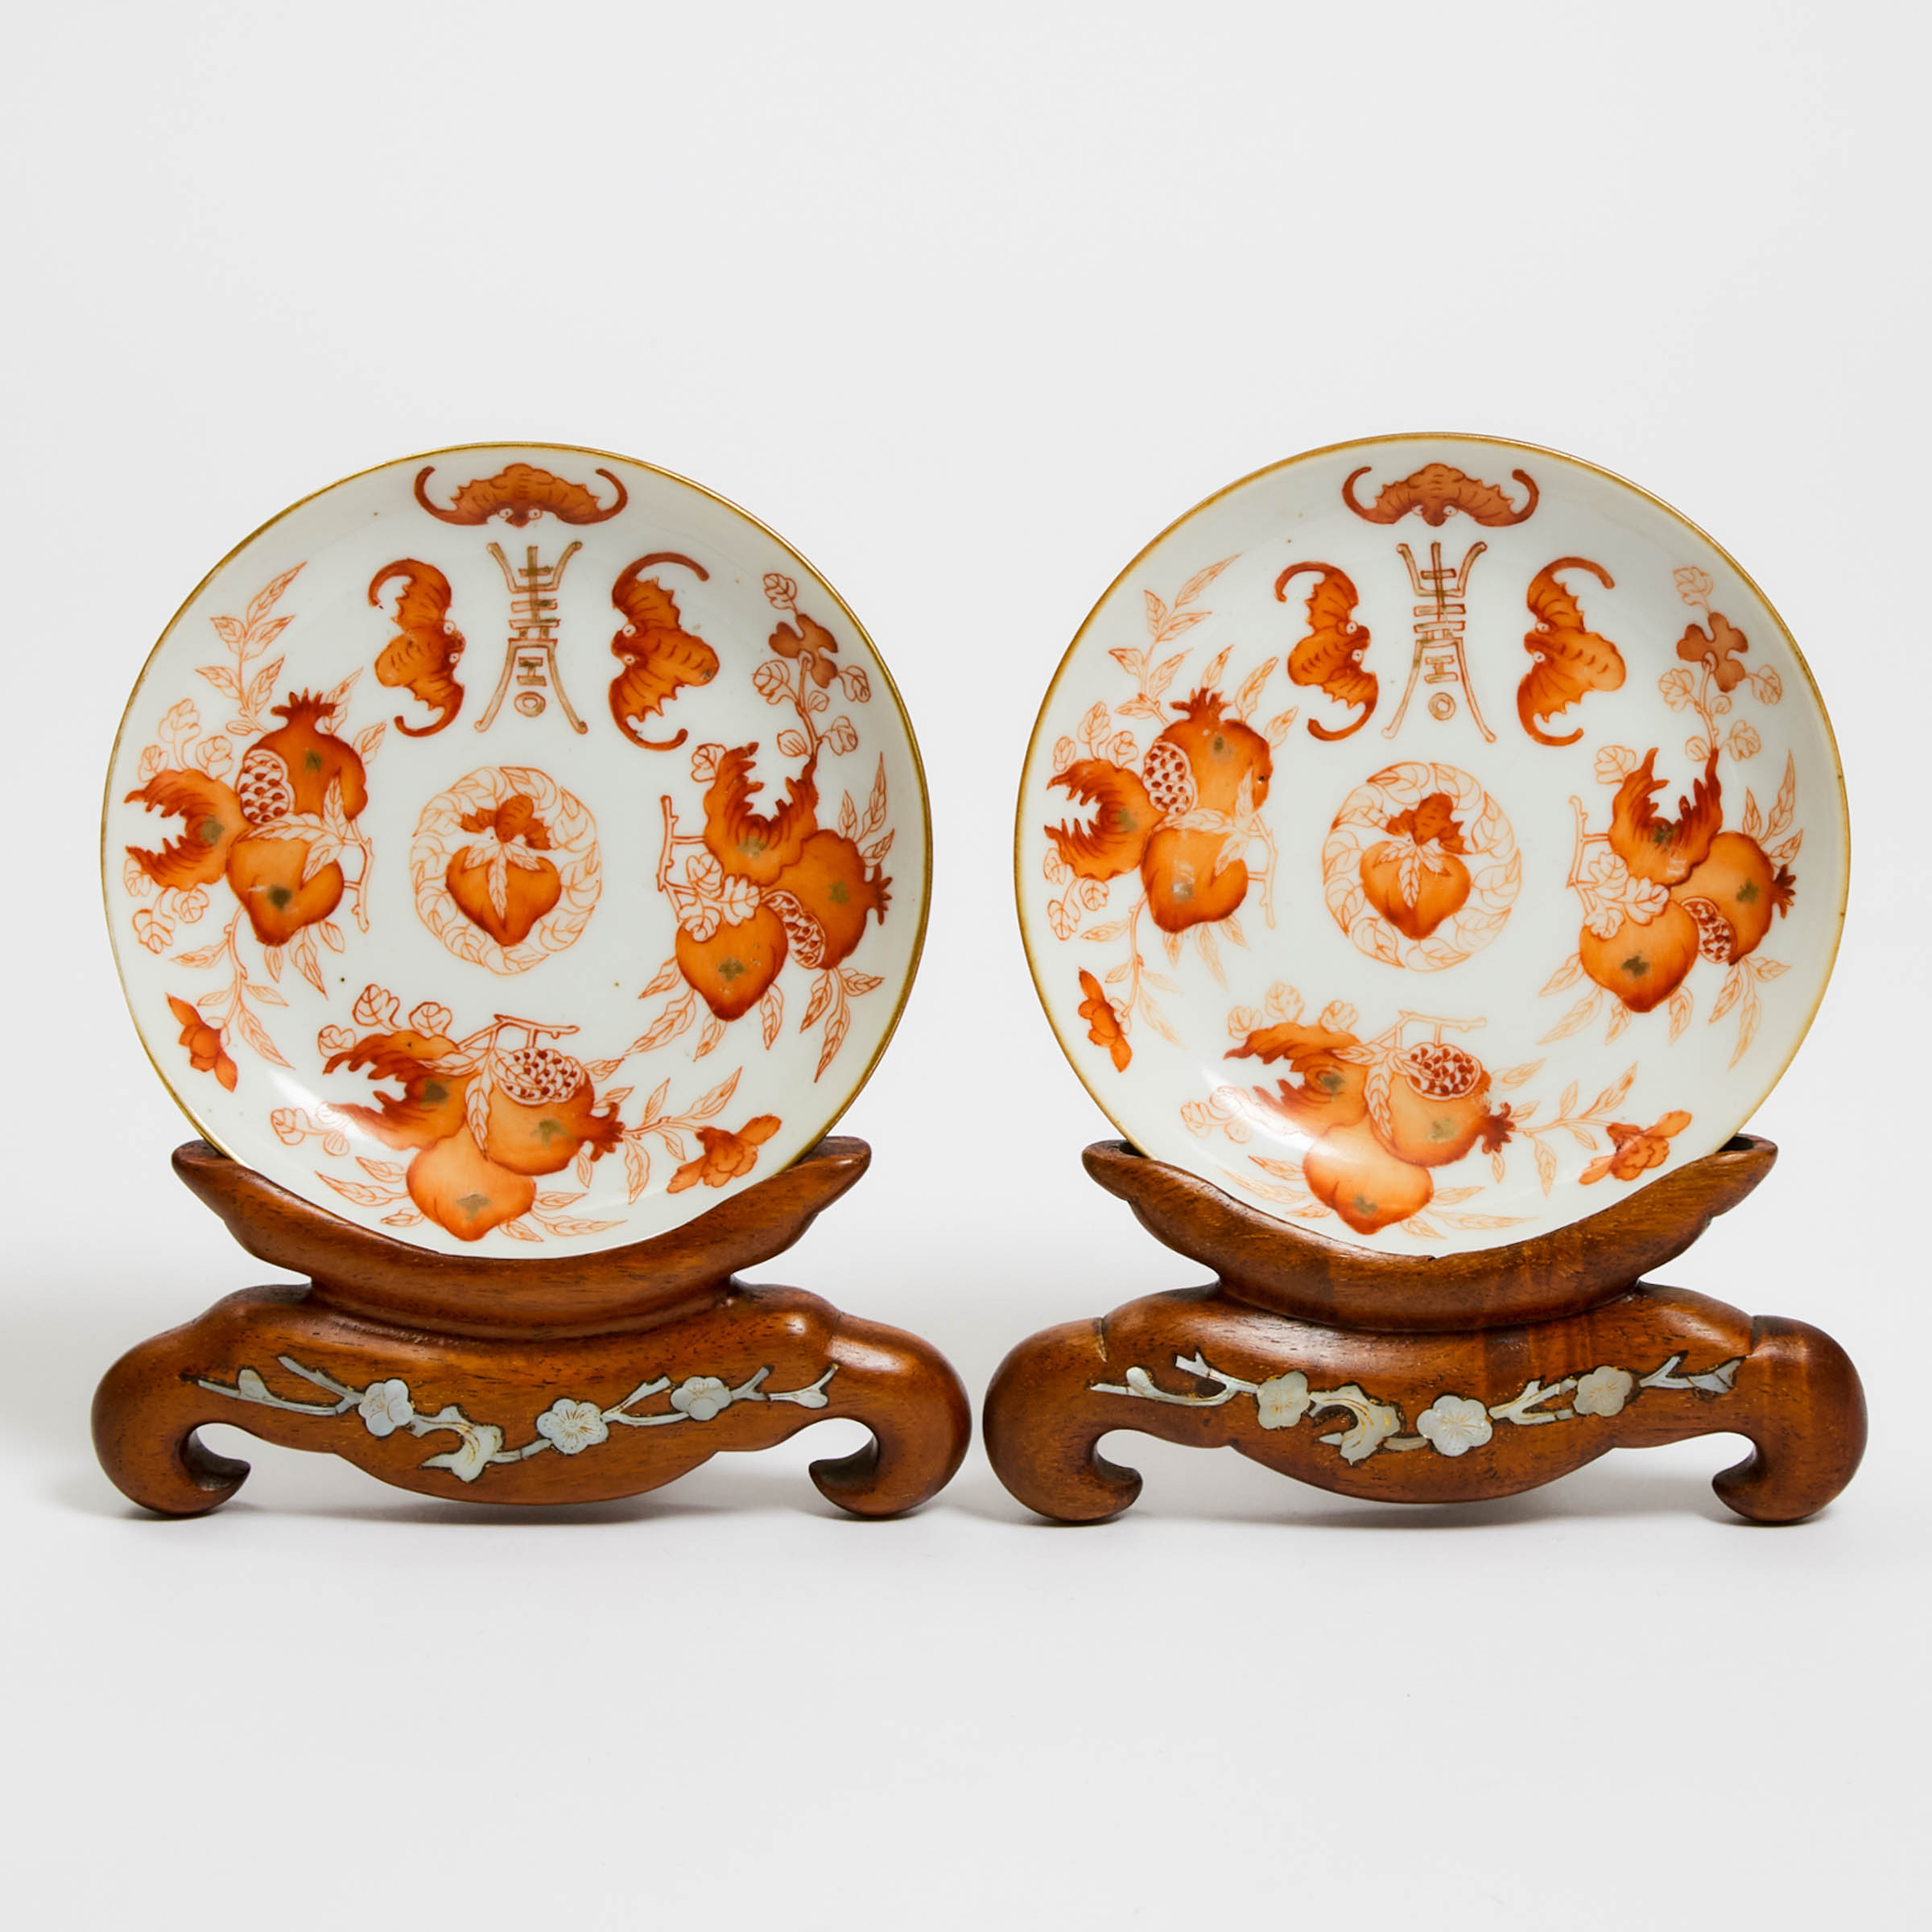 A Pair of Iron-Red Decorated 'Bats and Pomegranates' Dishes, Qianlong Mark, 18th Century